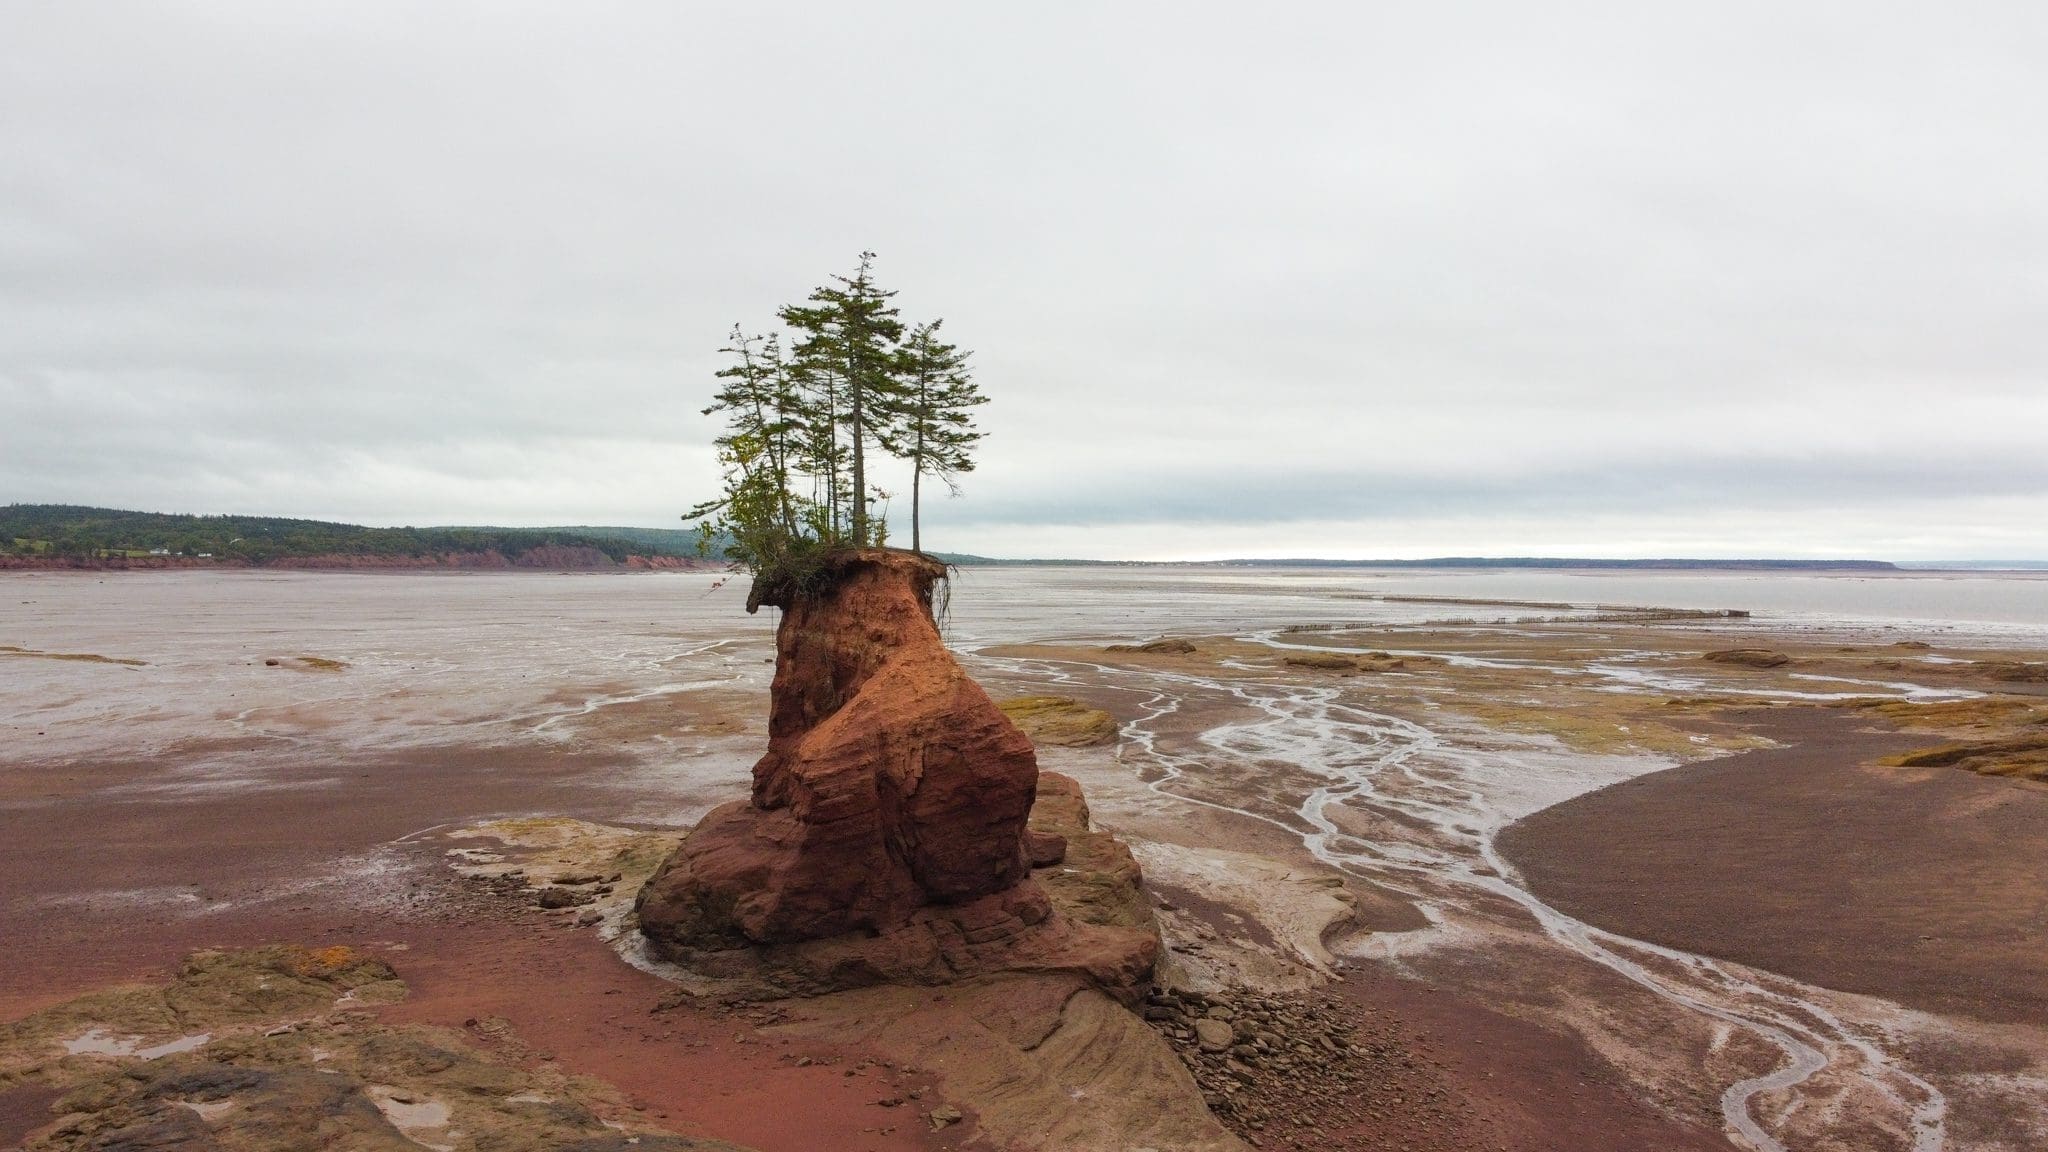 Bay of Fundy Travel Guide